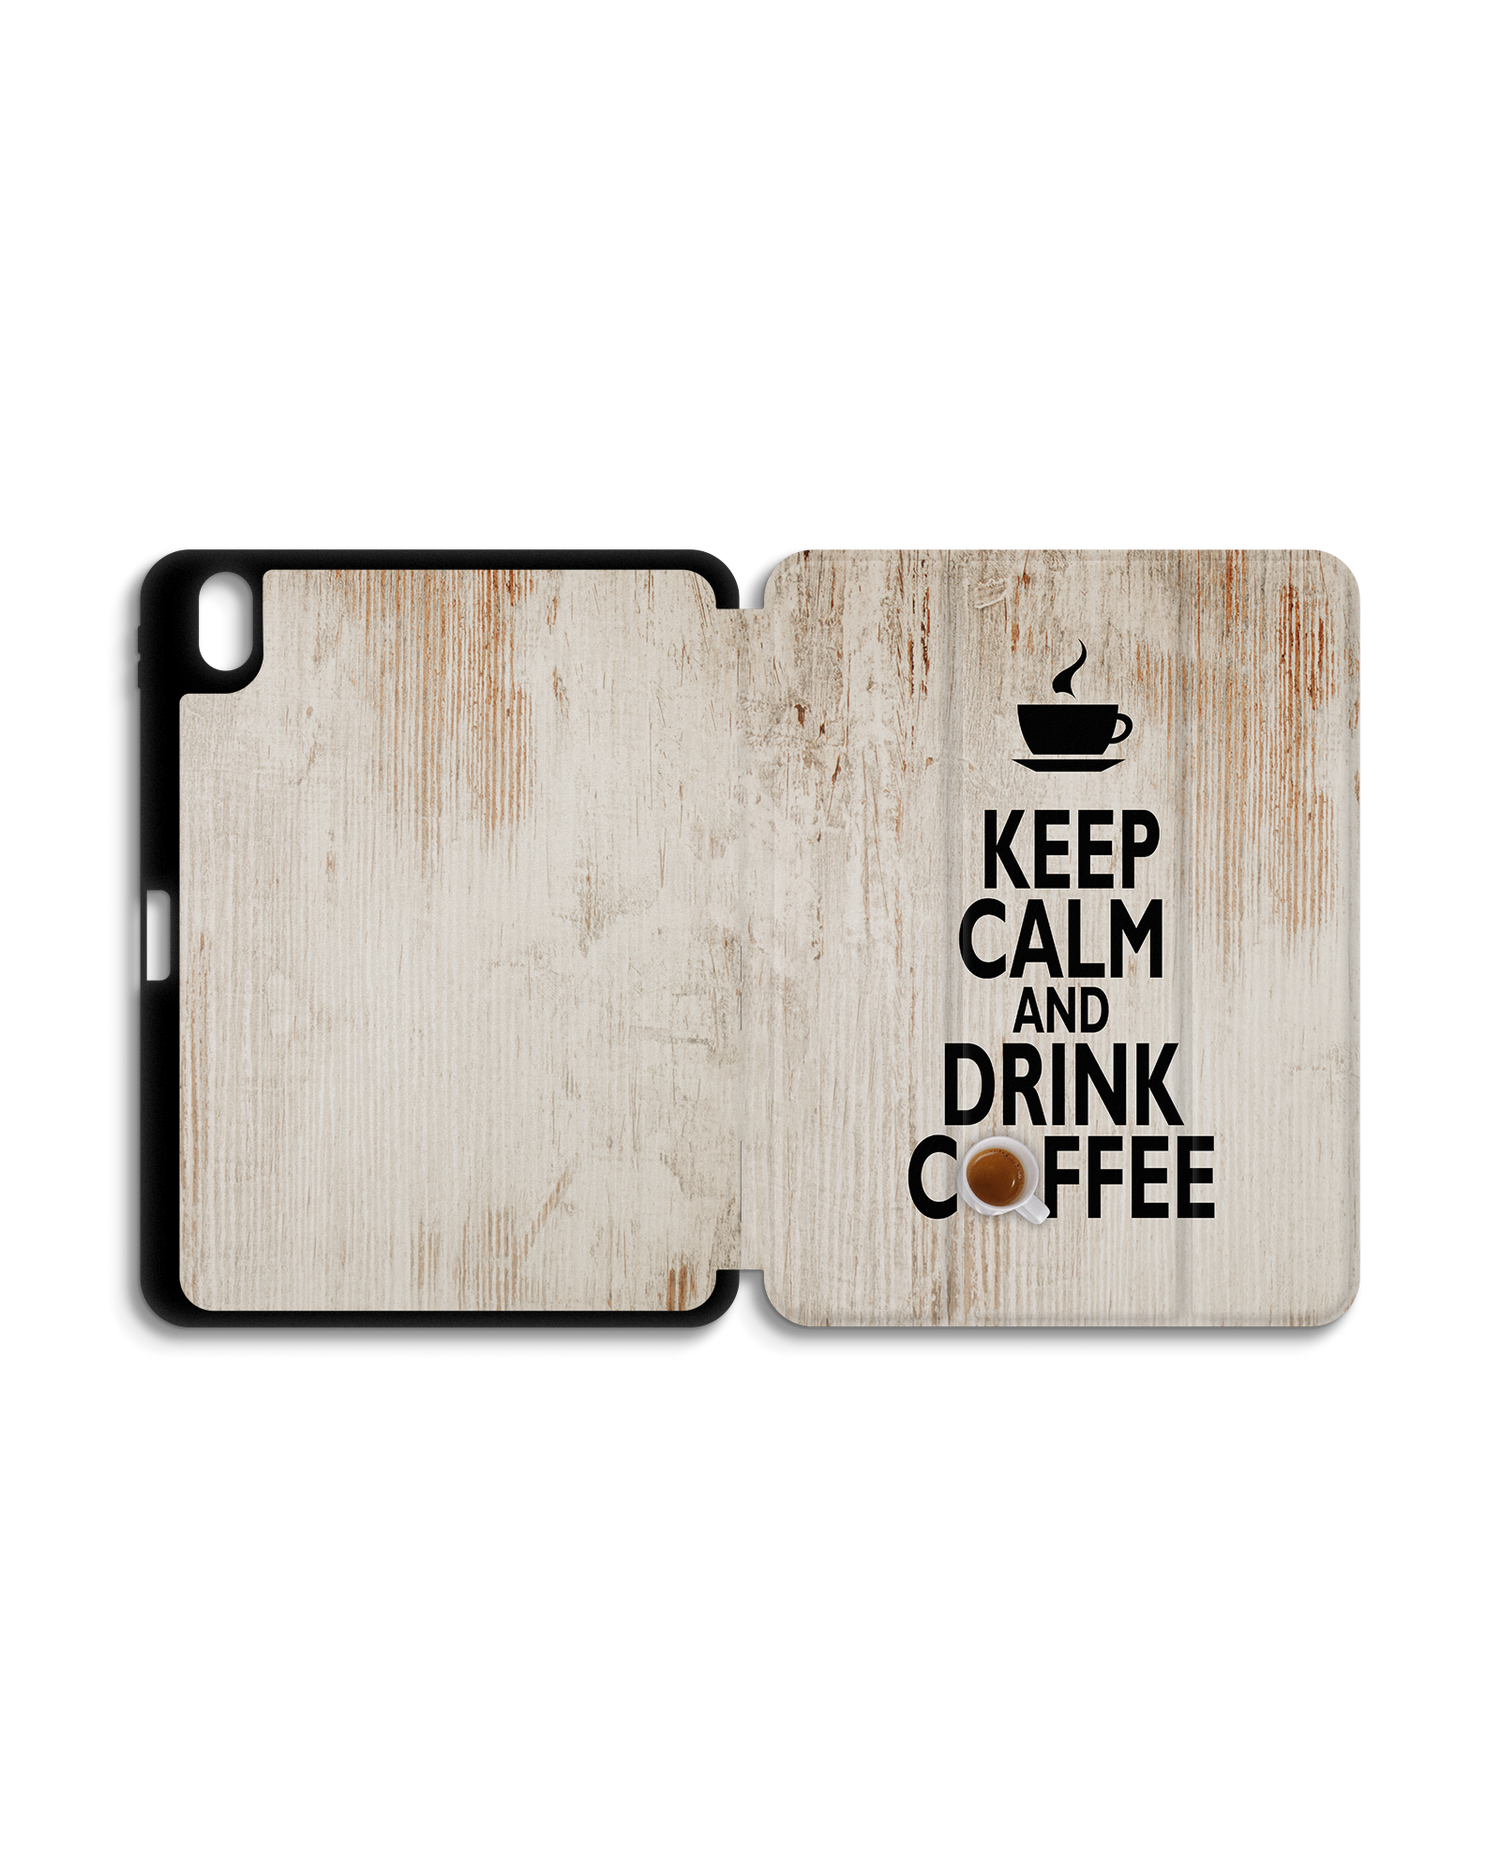 Drink Coffee iPad Case with Pencil Holder for Apple iPad (10th Generation): Opened exterior view